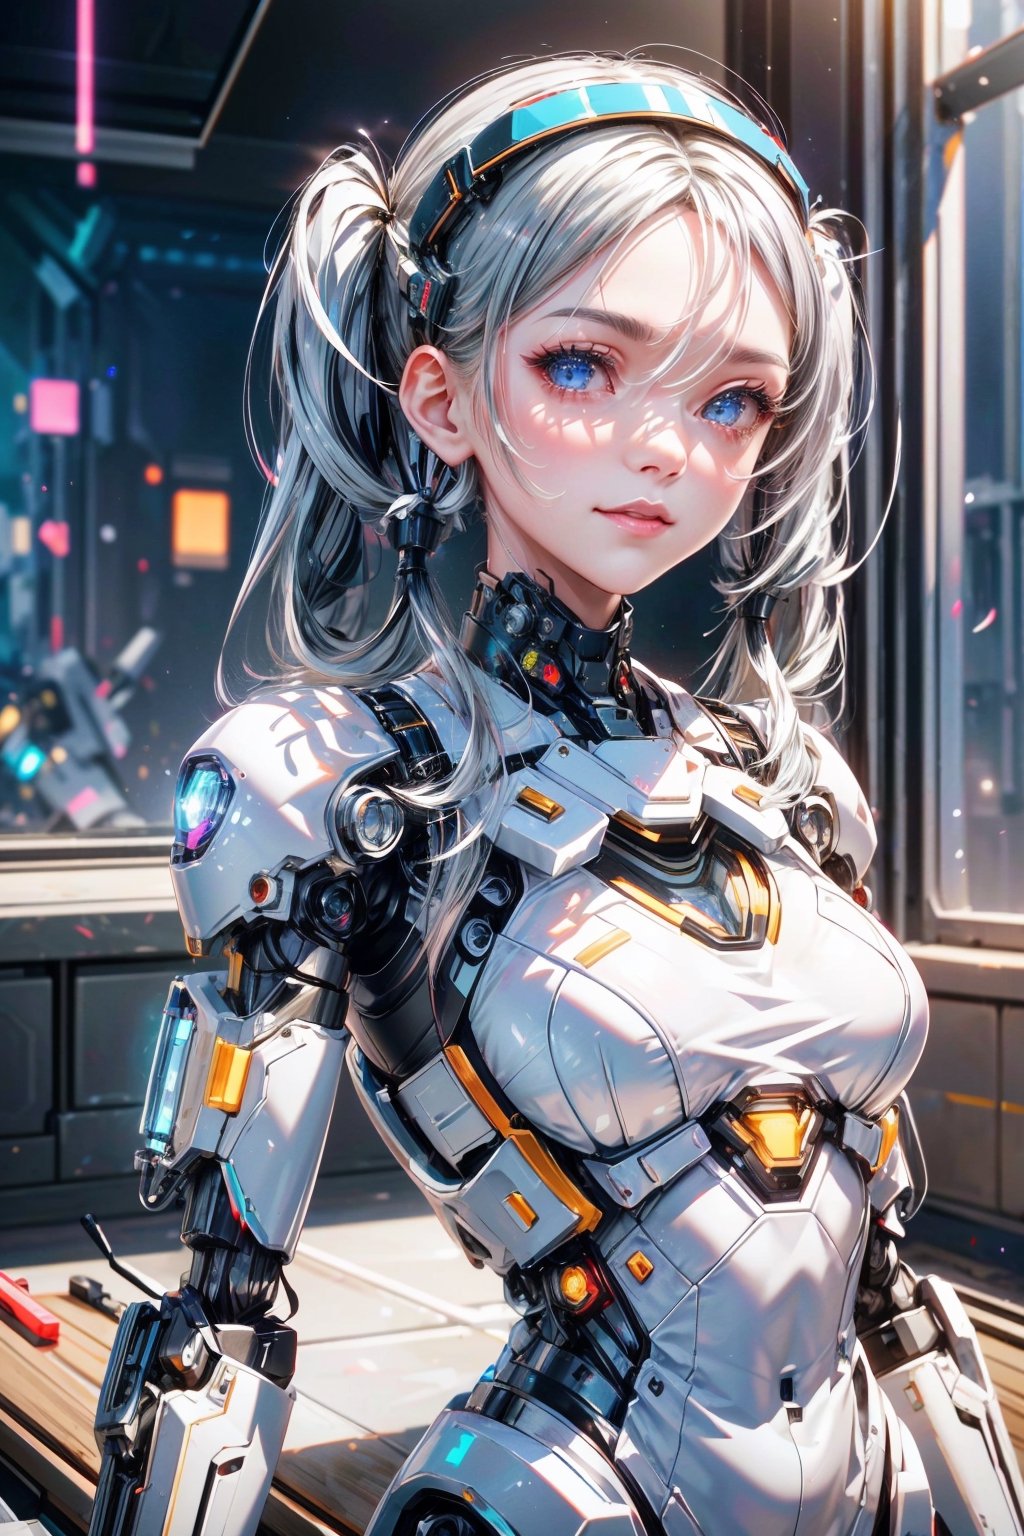 ((high resolution)), ((UHD)), ((incredibly absurdres)), break. ((One android girl with happy smile)), break. ((sliver twintail hair:1.5)), ((upper body:1.5)), ((looking at camera:1.3)), break. ((in the cyberstyle city)), ((slender boby)), ((intricate internal structure)), ((brighten parts:1.5)), break. ((extremely detailed mecha suit:1.2)), break. (robotic arms), (robotic legs), (robotic hands), ((robotic joint:1.3)), break. Cinematic angle, ultra fine quality, masterpiece, best quality, incredibly absurdres, fhighly detailed, sharp focus, (photon mapping, radiosity, physically-based rendering, automatic white balance), masterpiece, best quality, Mecha body, furure_urban, incredibly absurdres